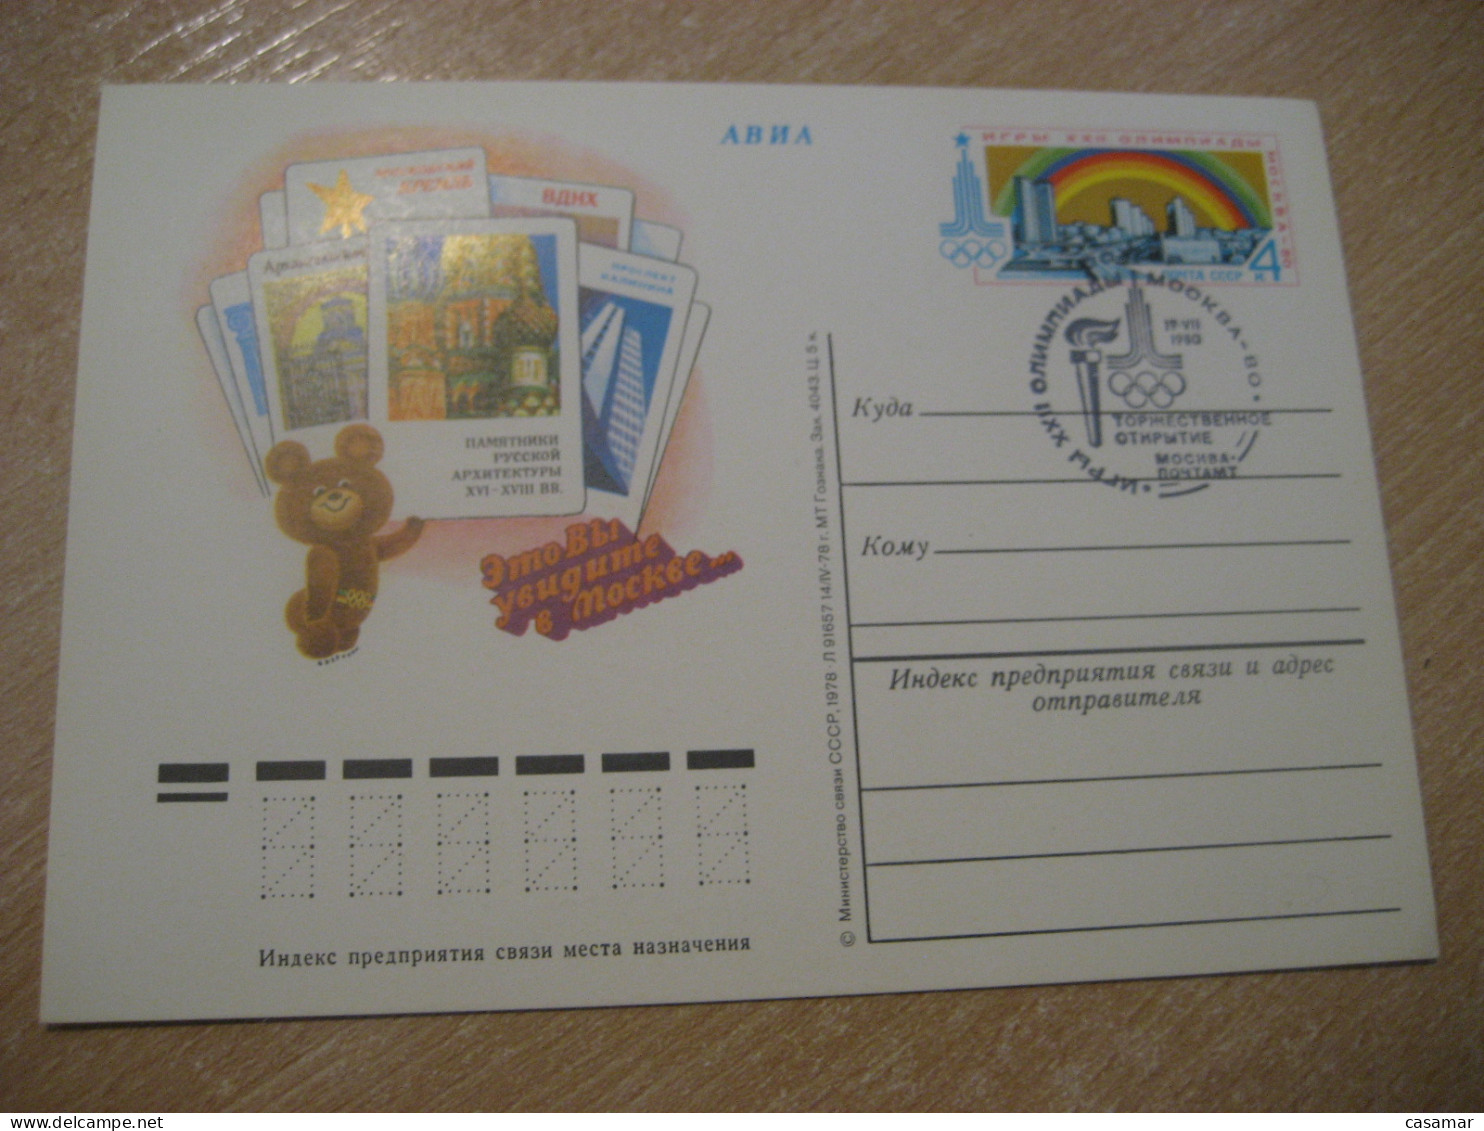 1980 Olympic Mascot Moscow Olympic Games Olympics Torch Cancel Postal Stationery Card RUSSIA USSR - Ete 1980: Moscou